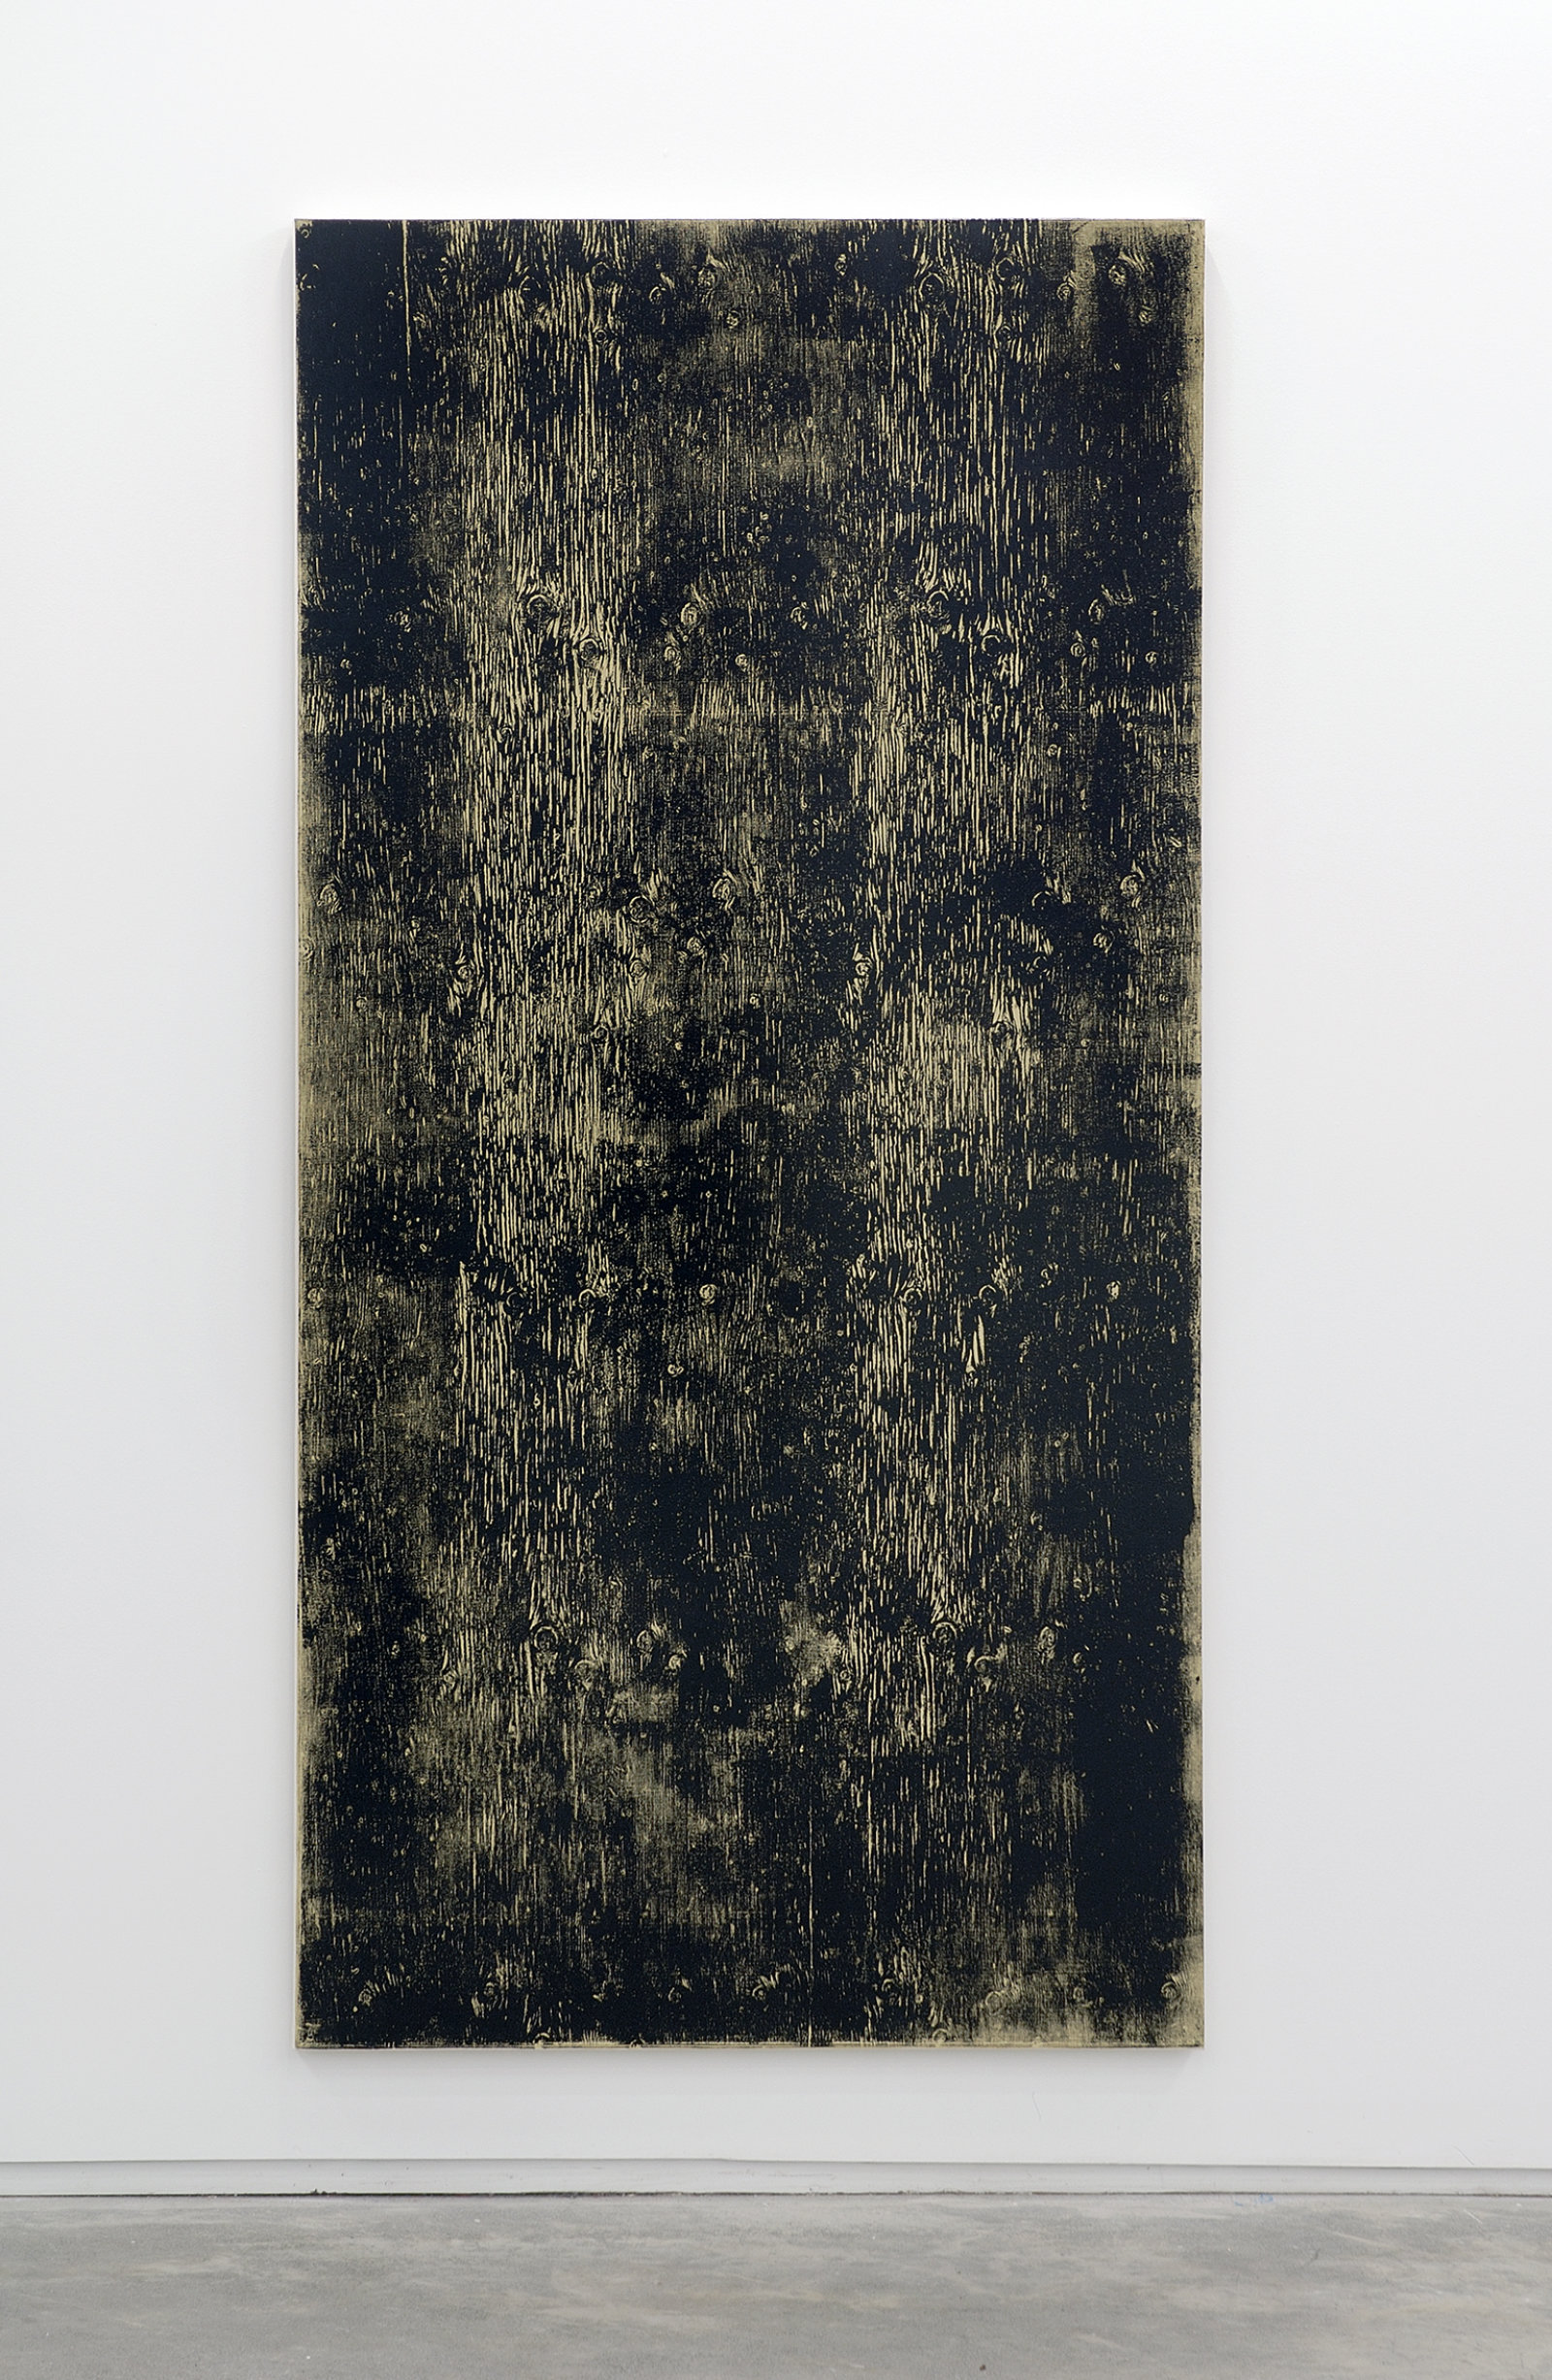 Ian Wallace, Untitled (Monoprint with Mustard), 1990, acrylic on canvas, 90 x 20 in. (229 x 51 cm)